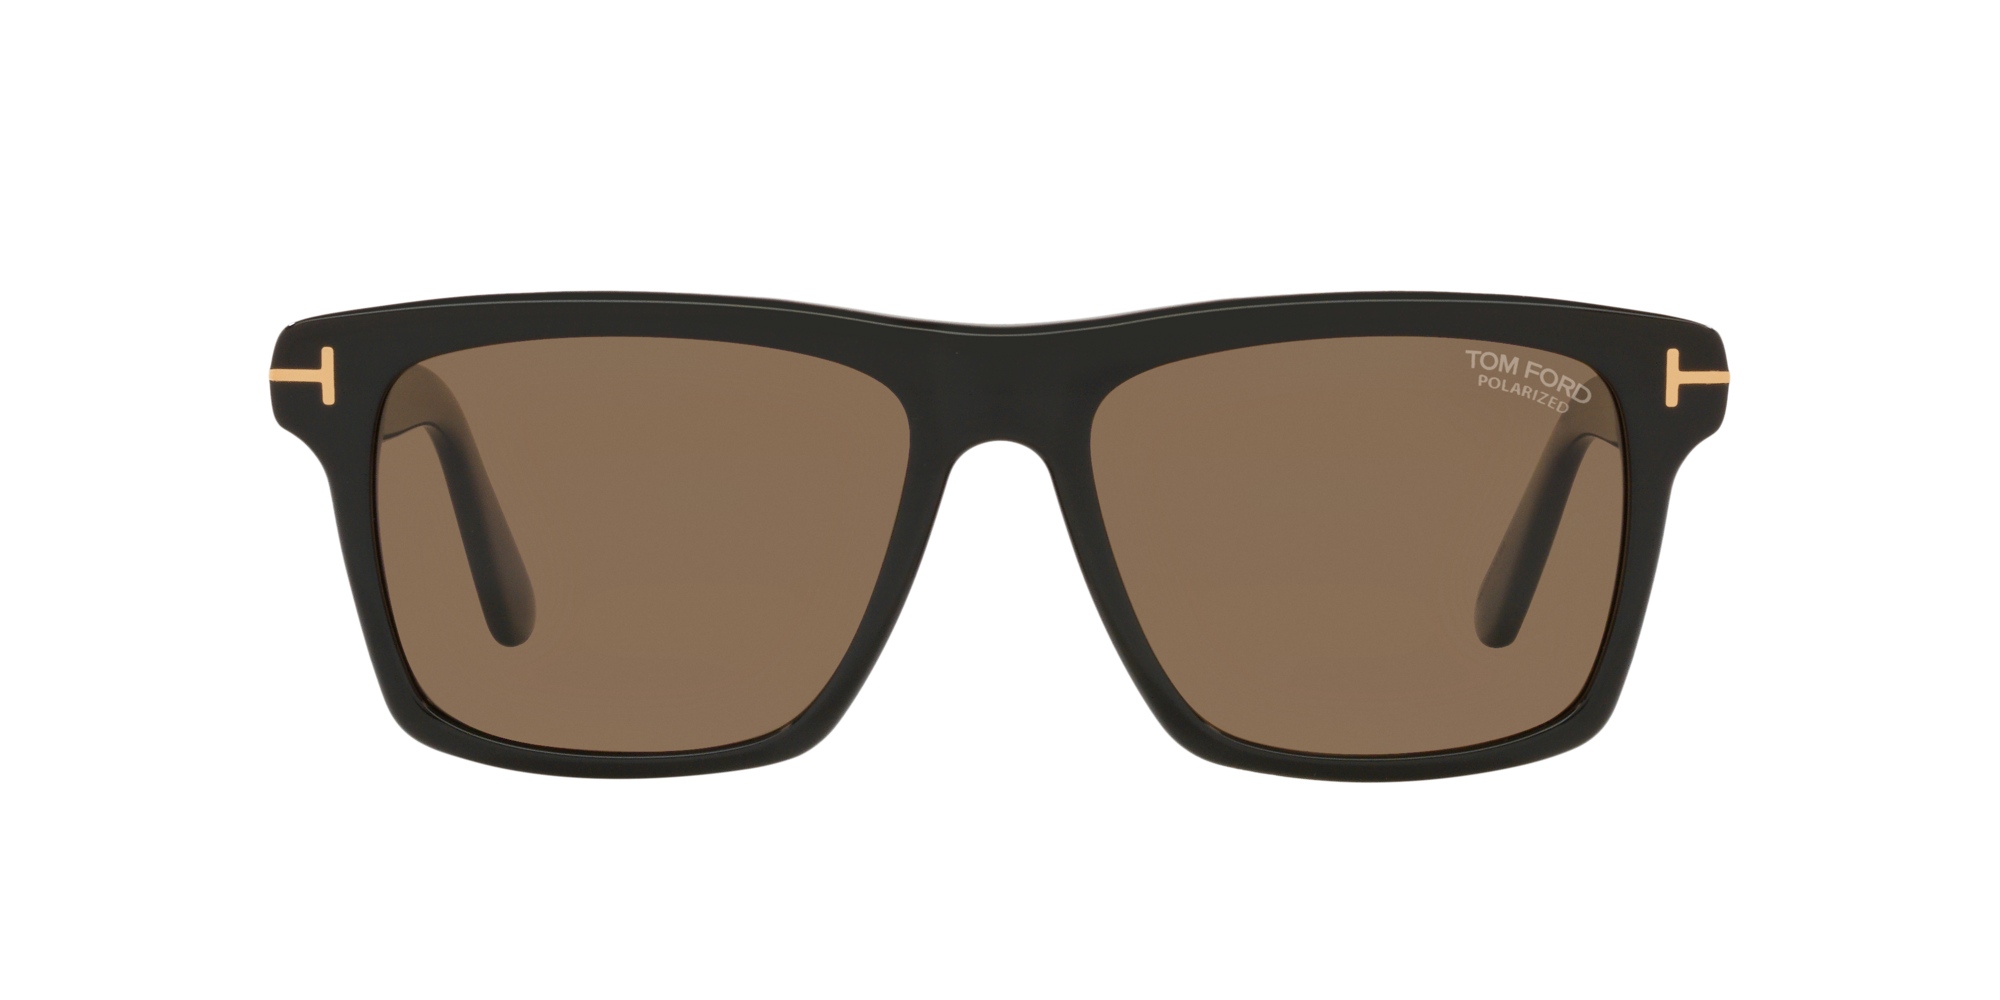 Sunglasses Tom Ford Nolan FT0925 (01A) FT0925 Man | Free Shipping Shop  Online